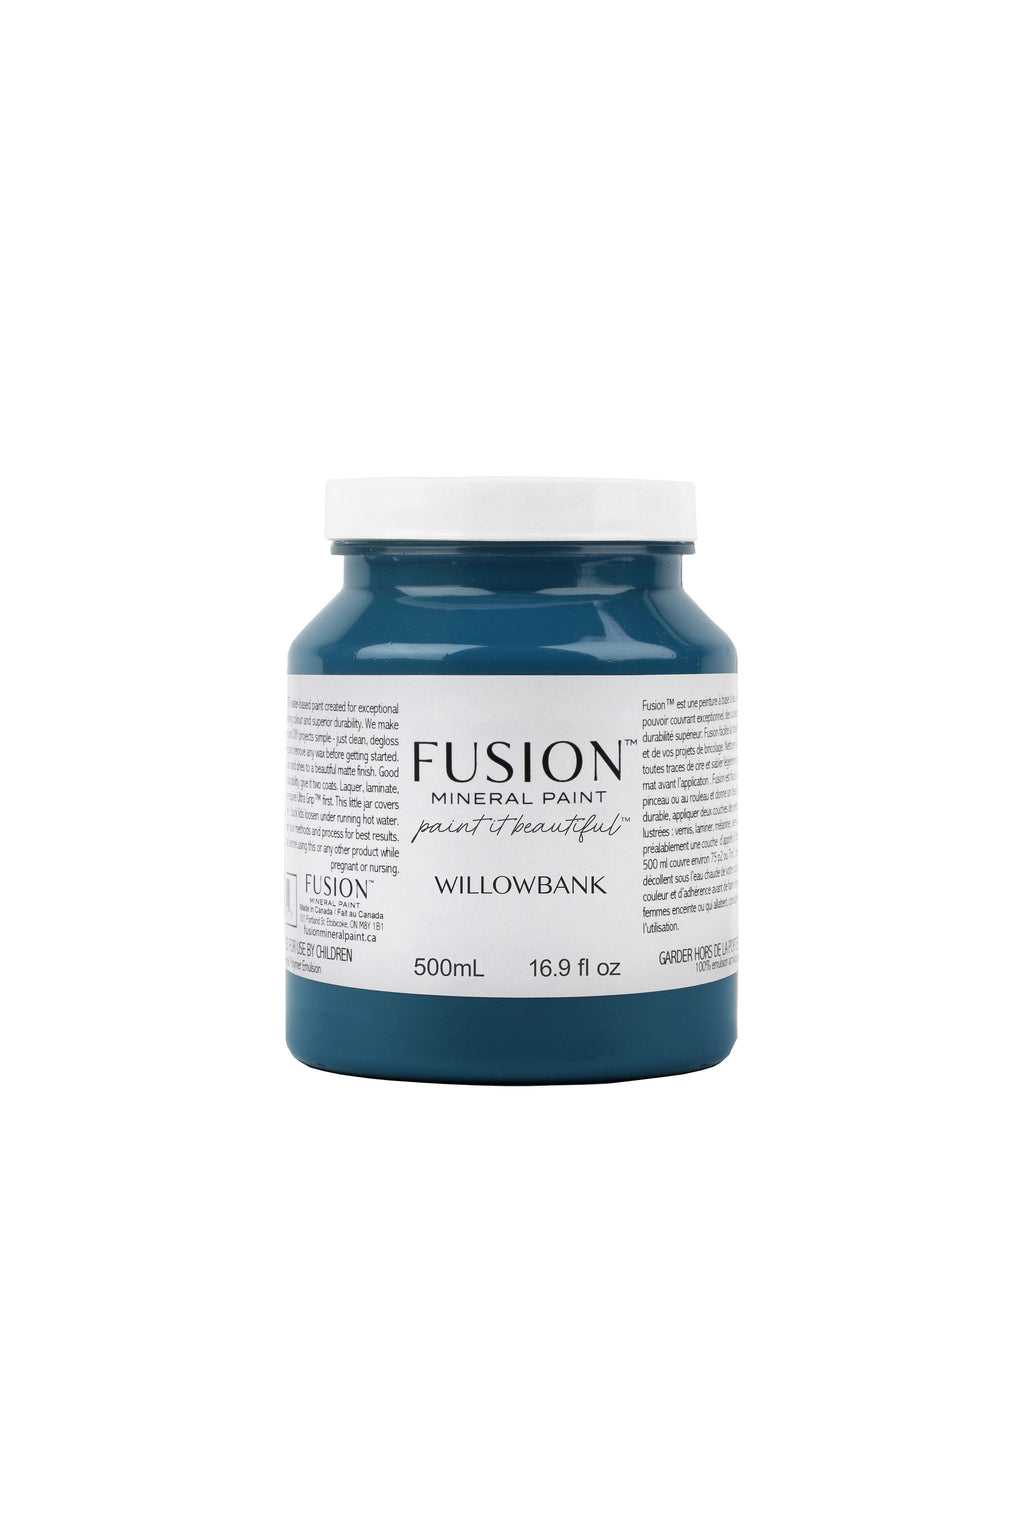 Willowbank Fusion Mineral Paint - Pint